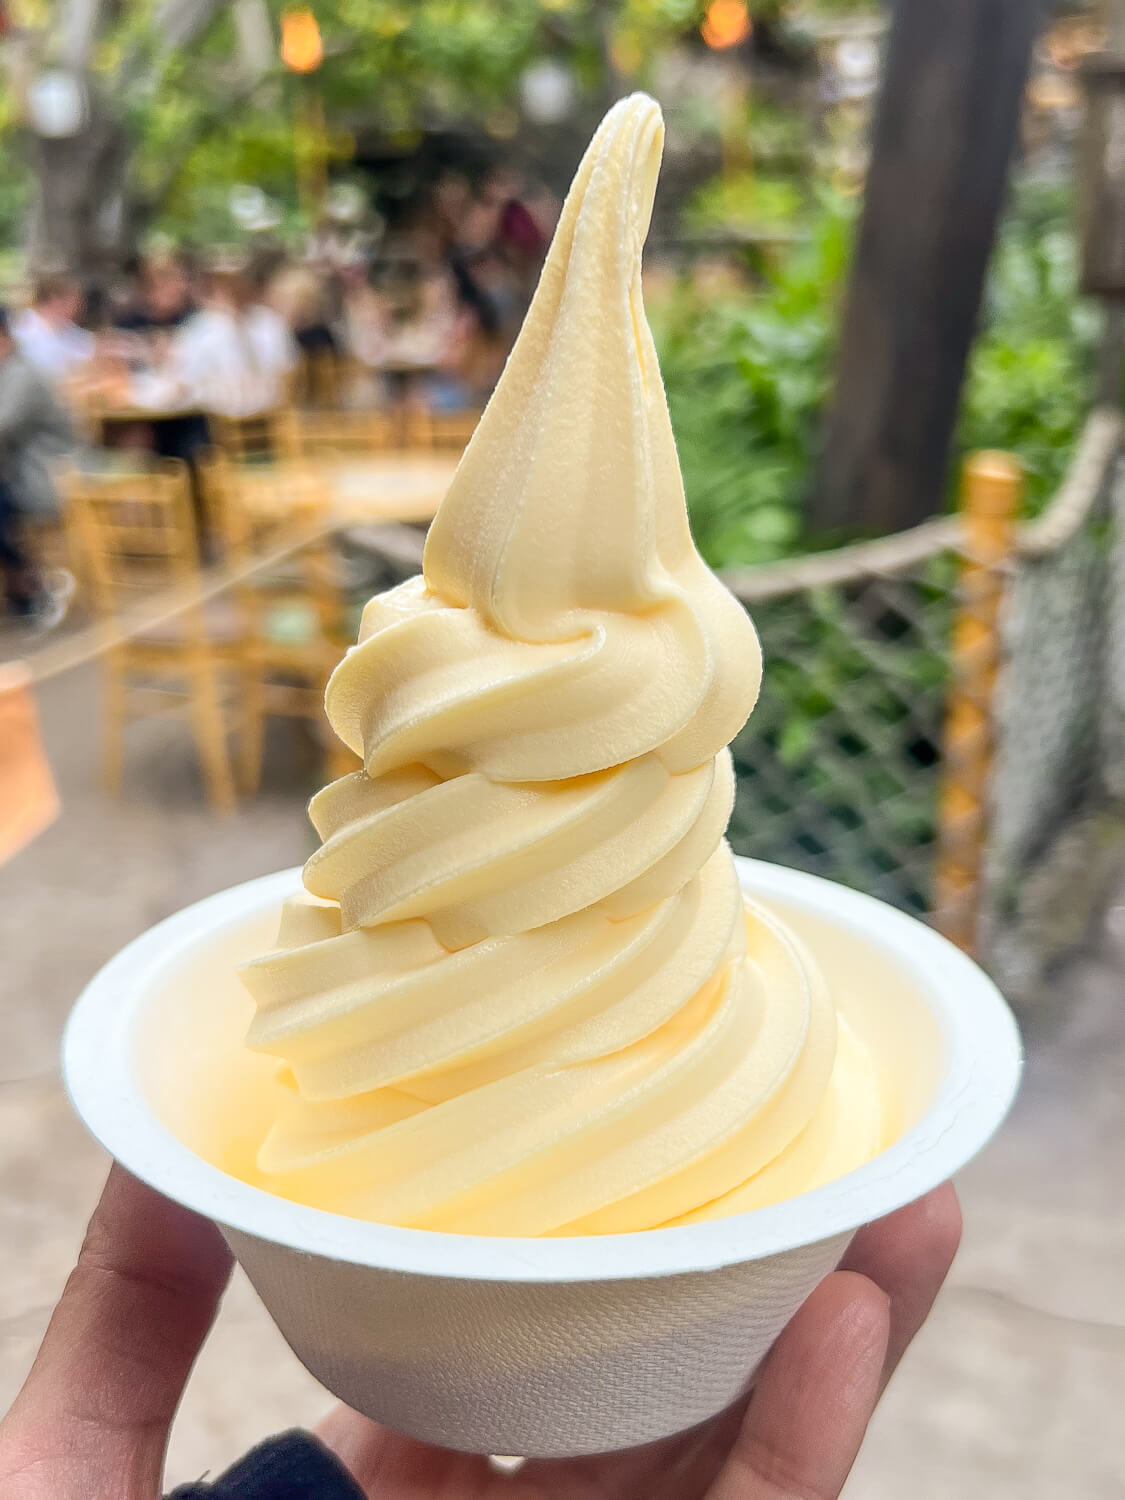 Classic Dole whip in a cup at Disneyland in California. 